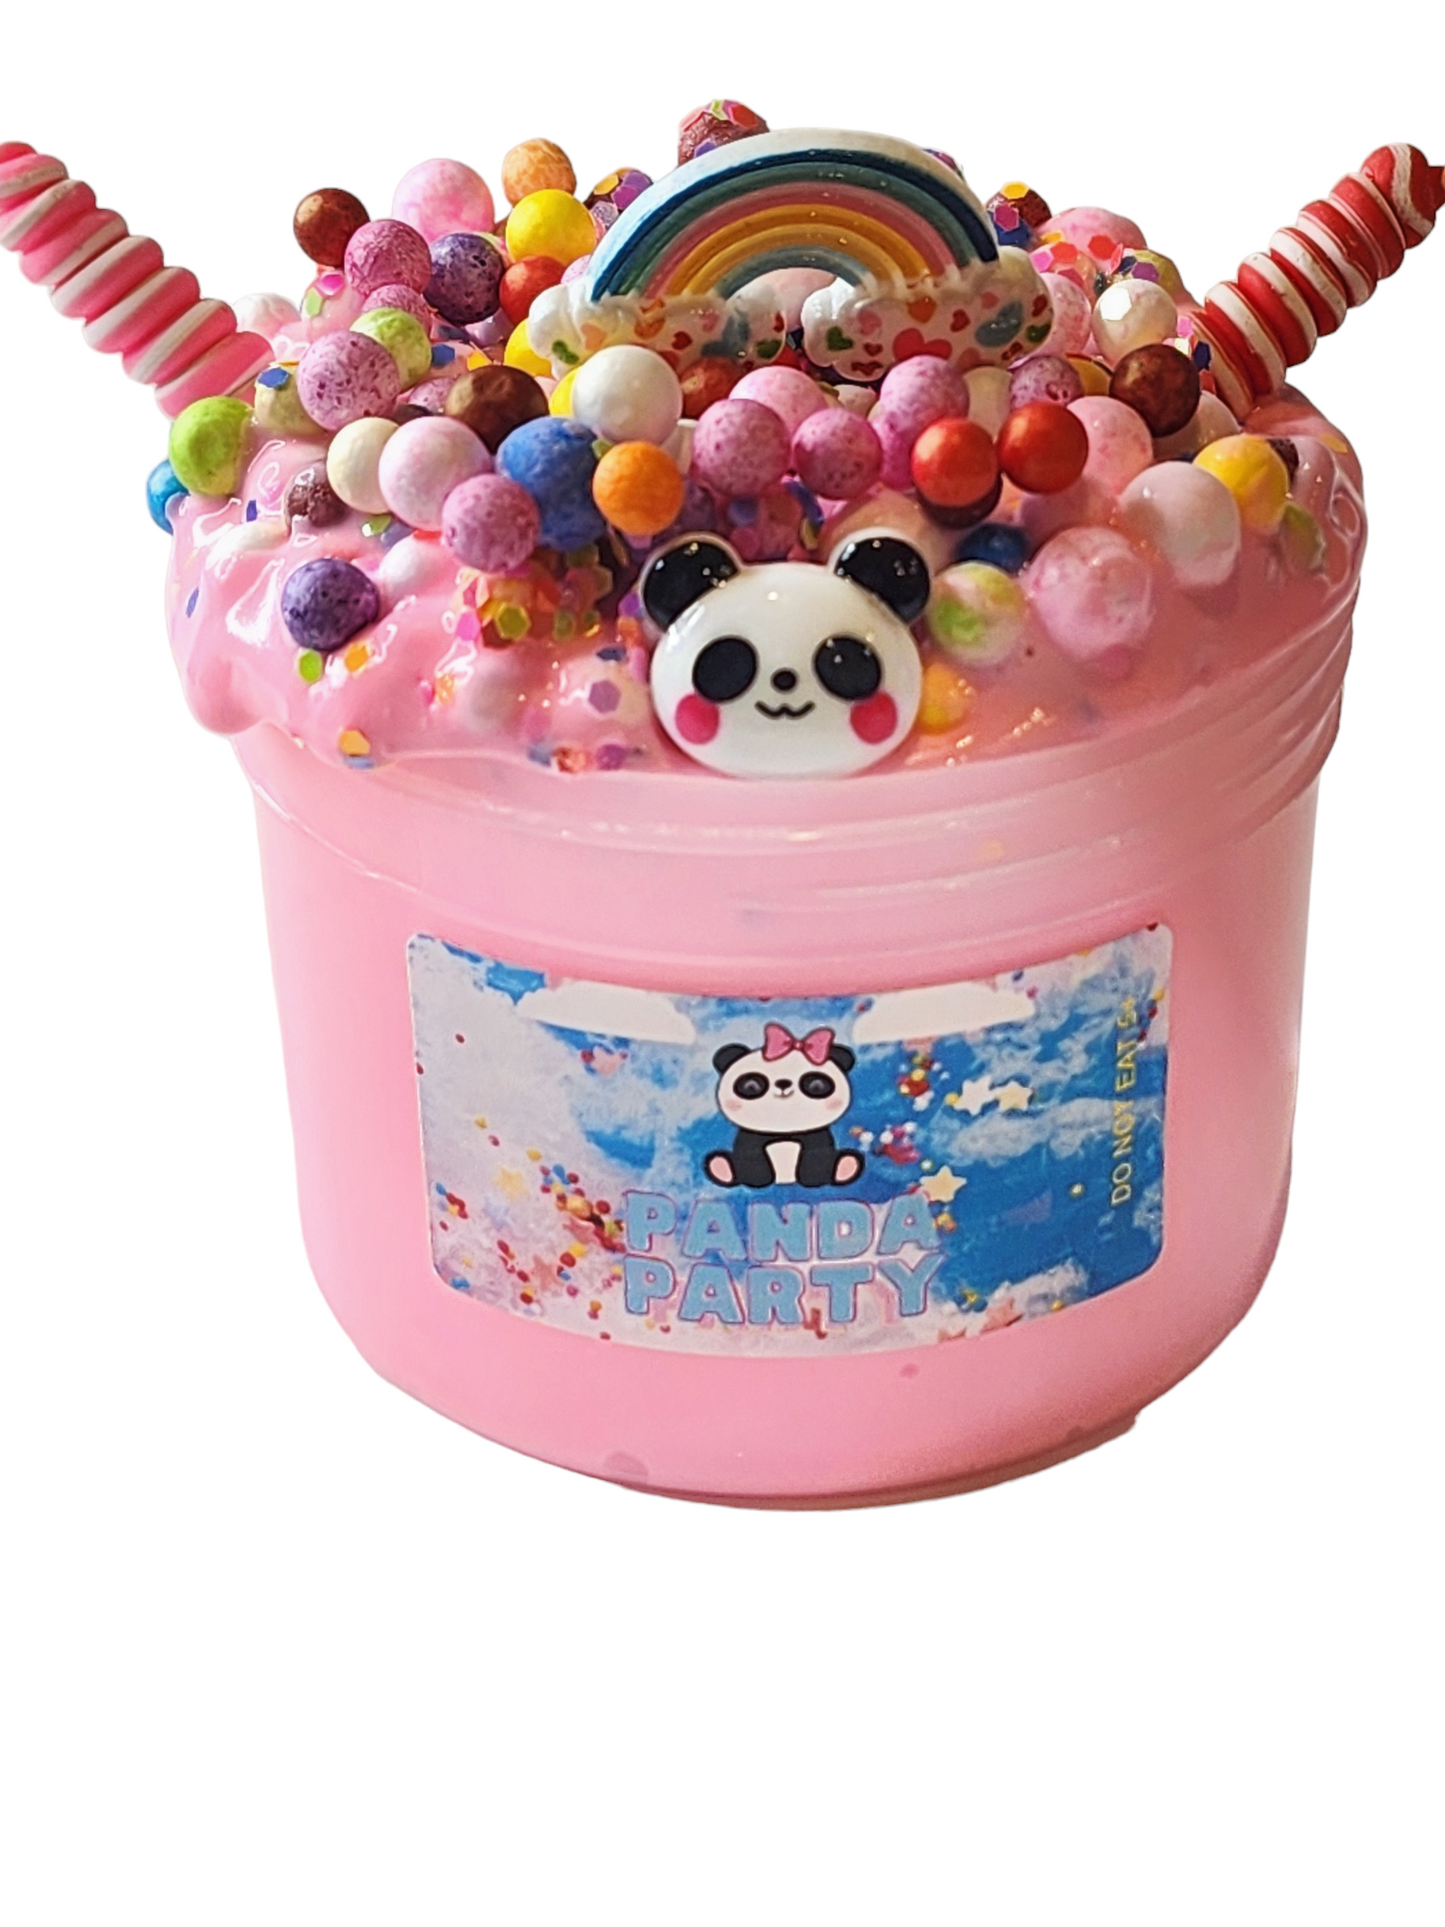 Panda Party Butter Slime